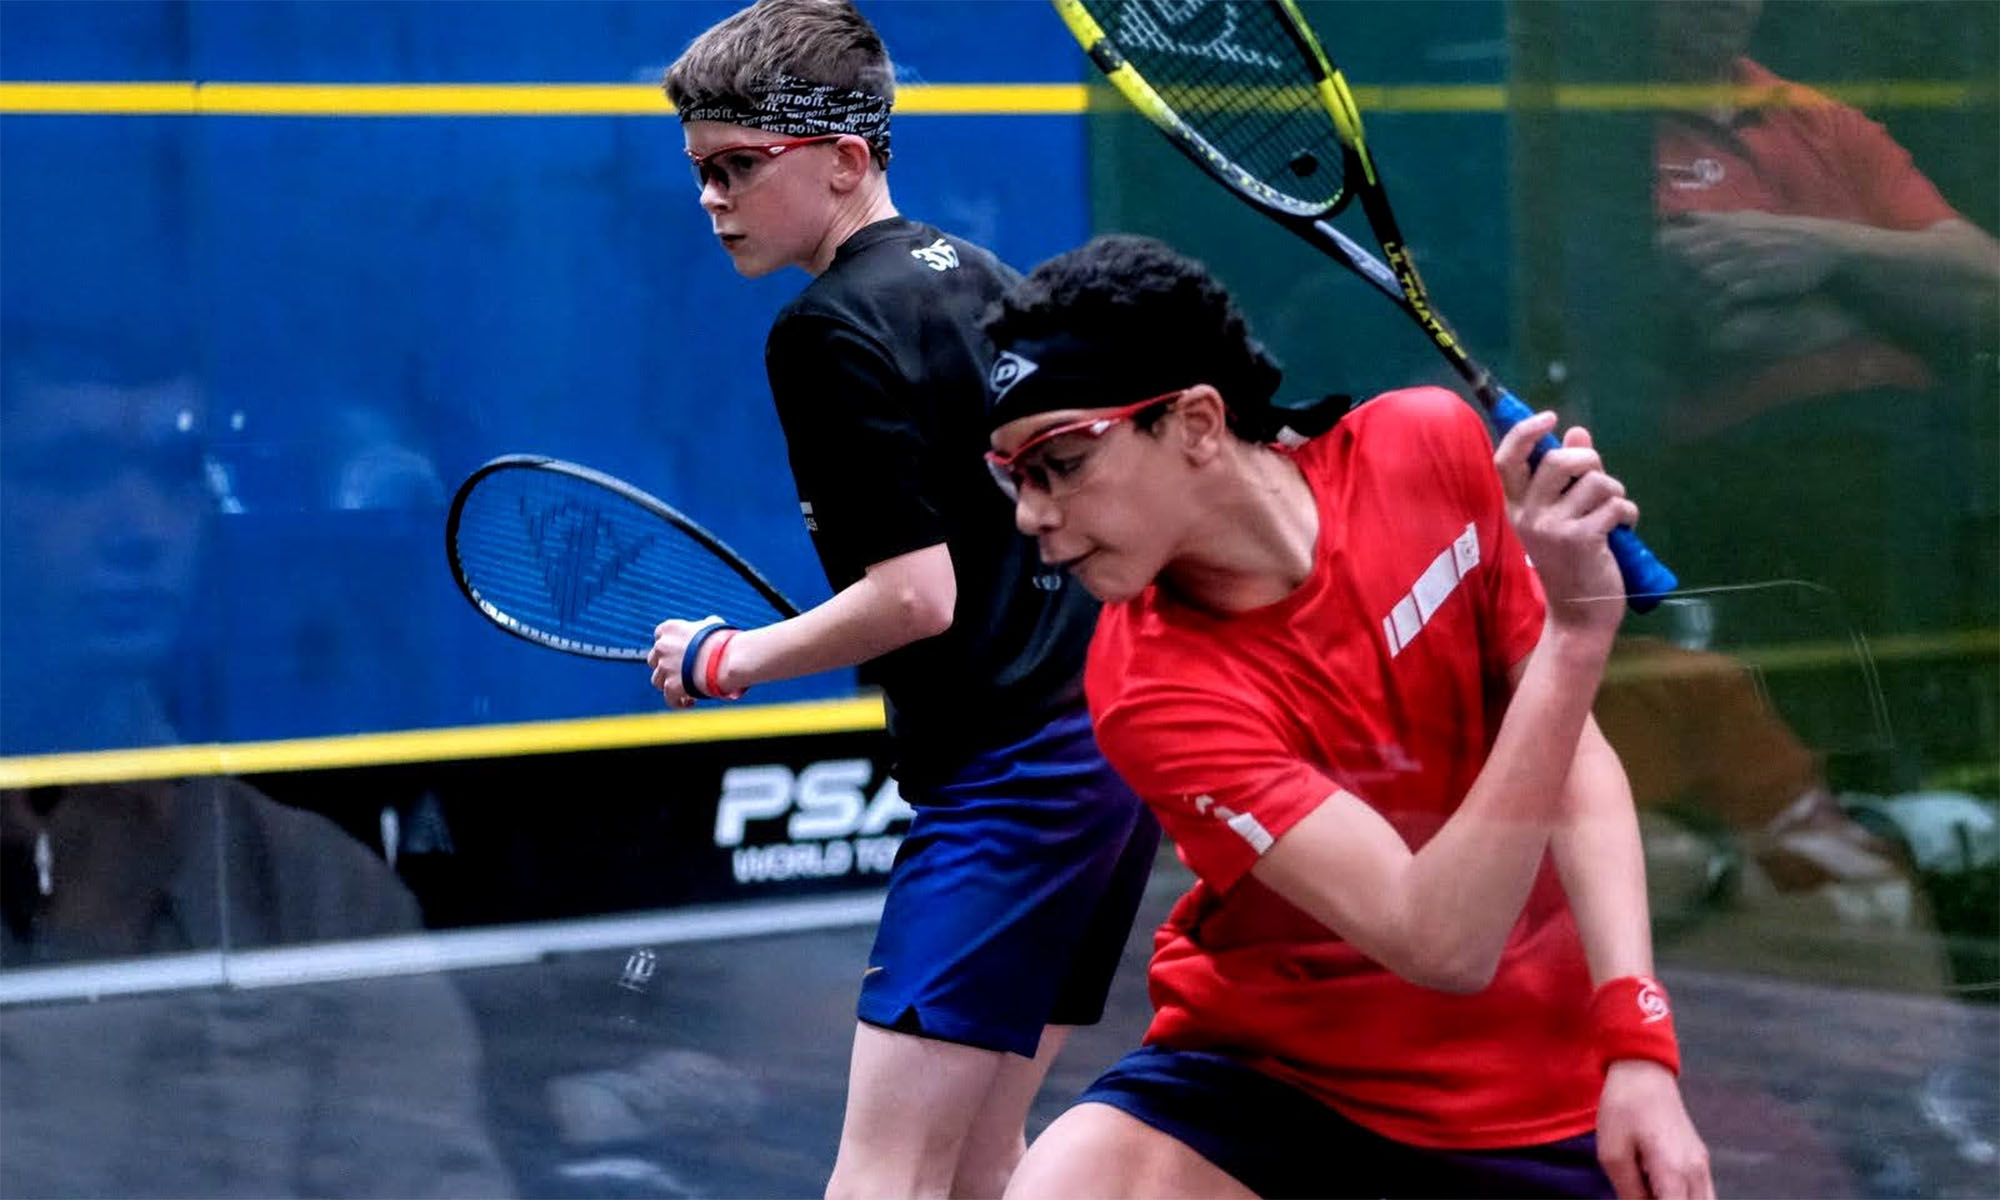 Two male squash players on court